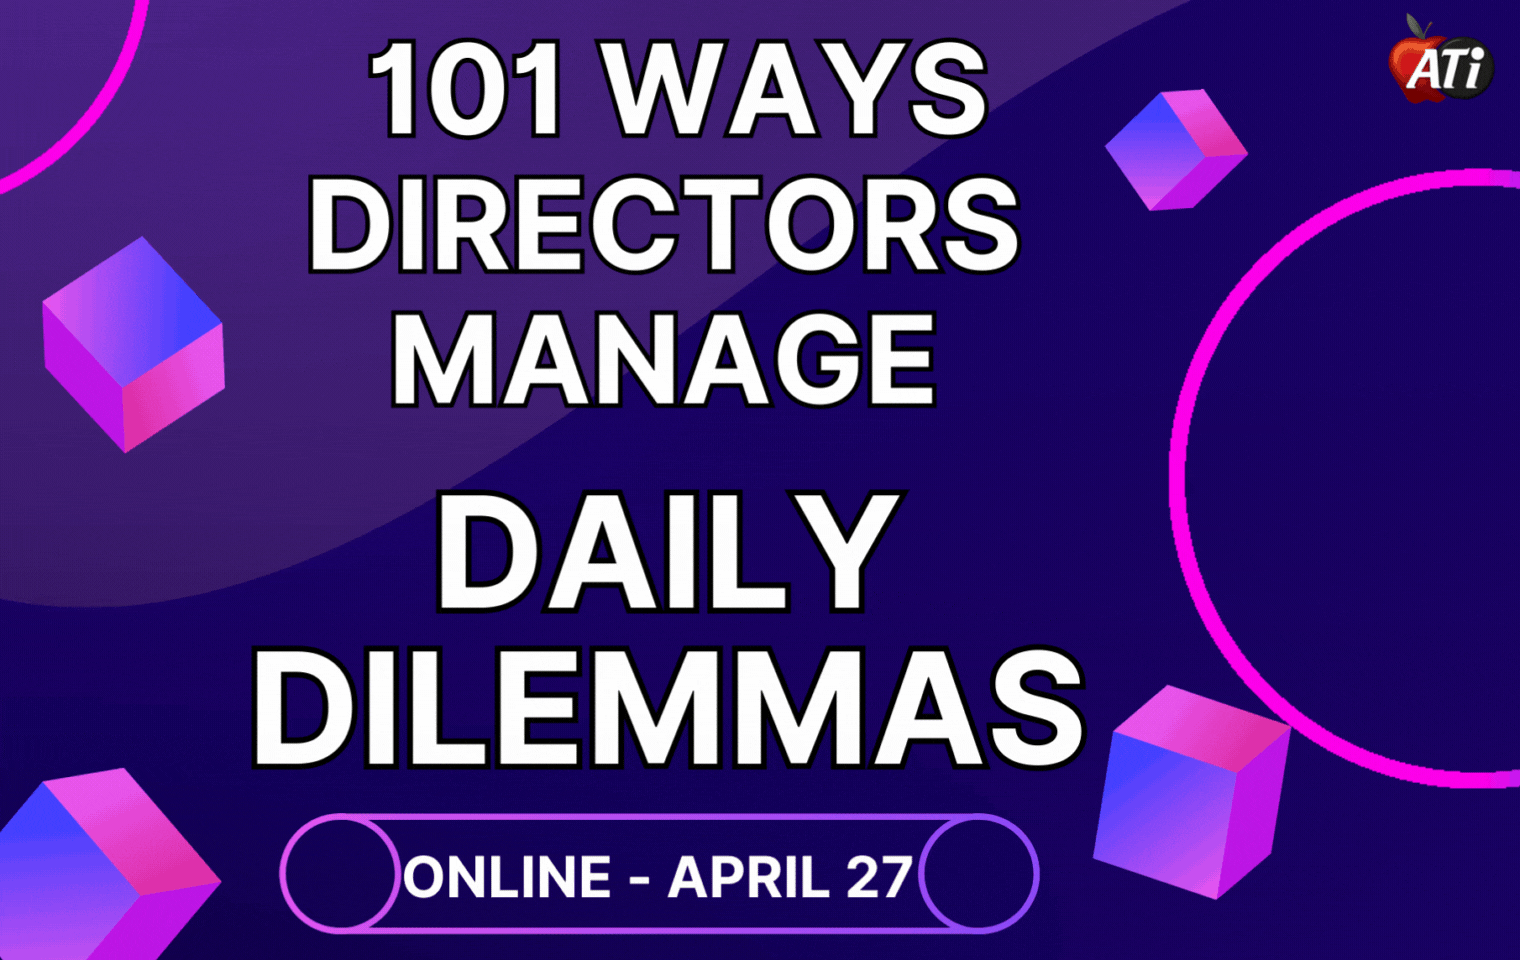 Image for 101 Ways Directors Manage: Daily Dilemmas